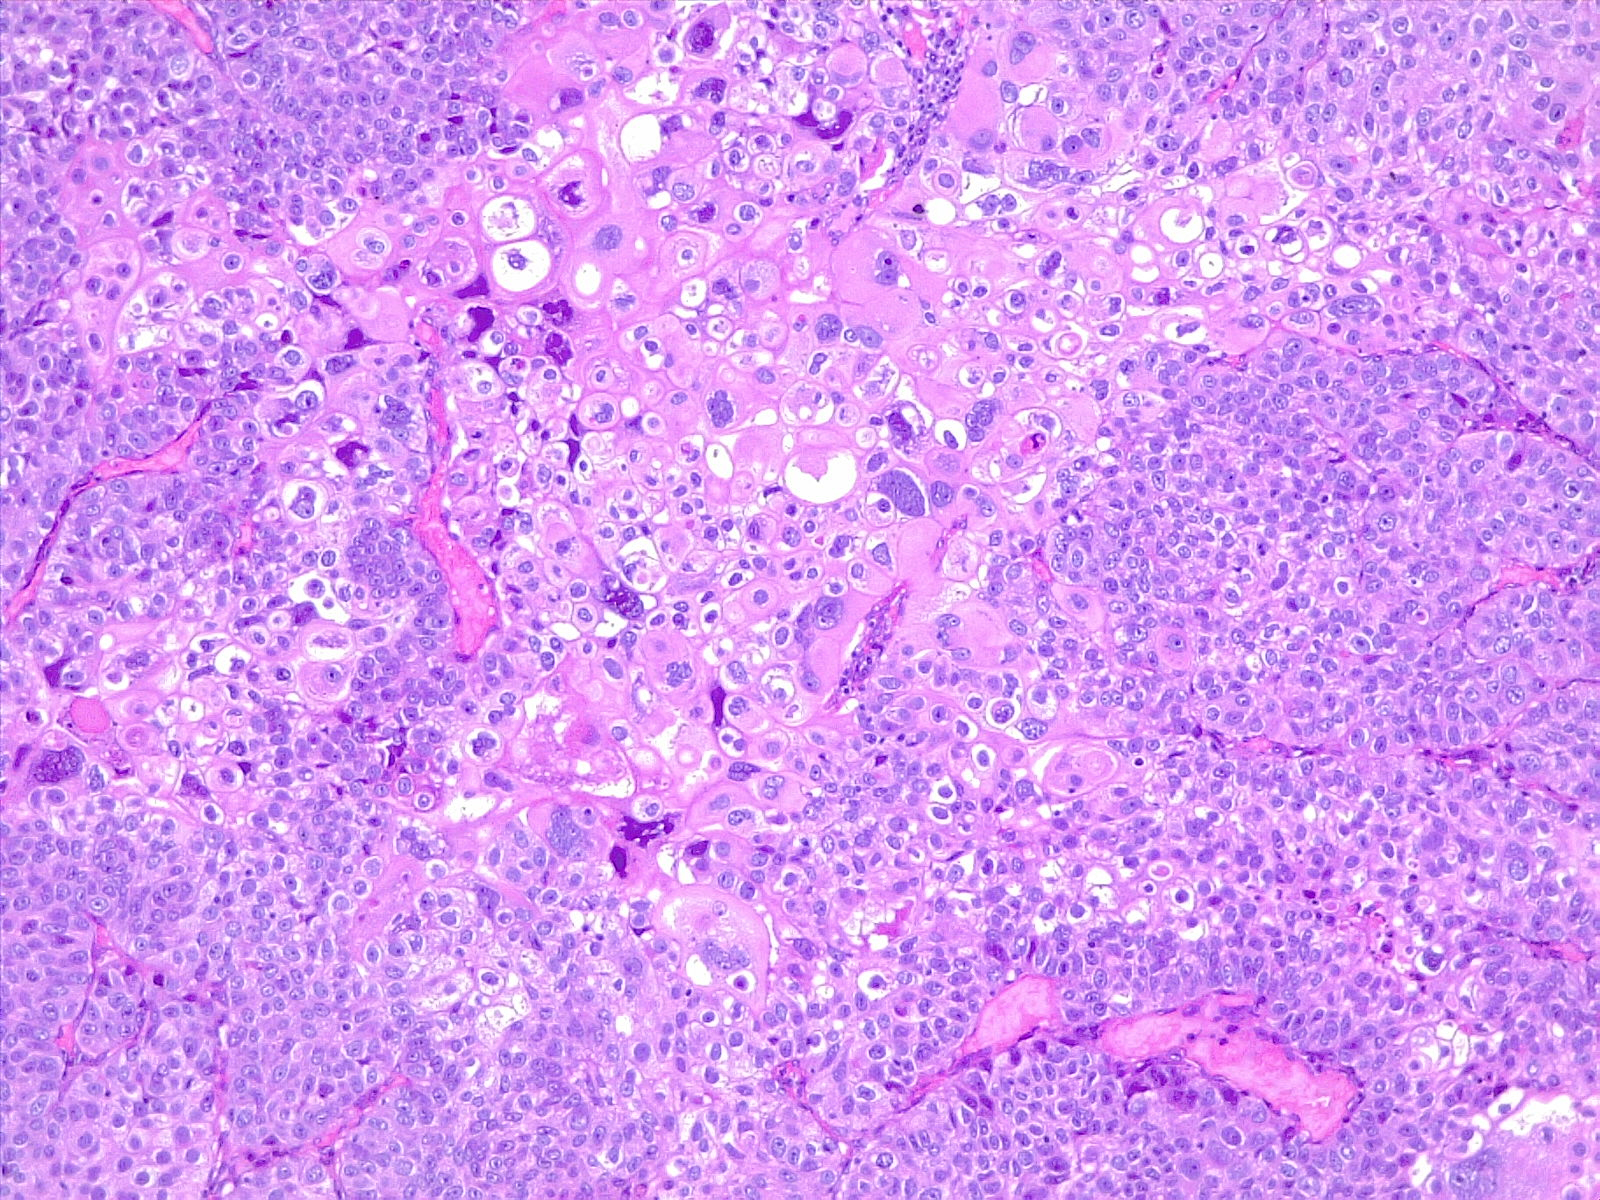 Poorly differentiated urothelial carcinoma, with metaplastic squamous appearance. 10x, H/E.